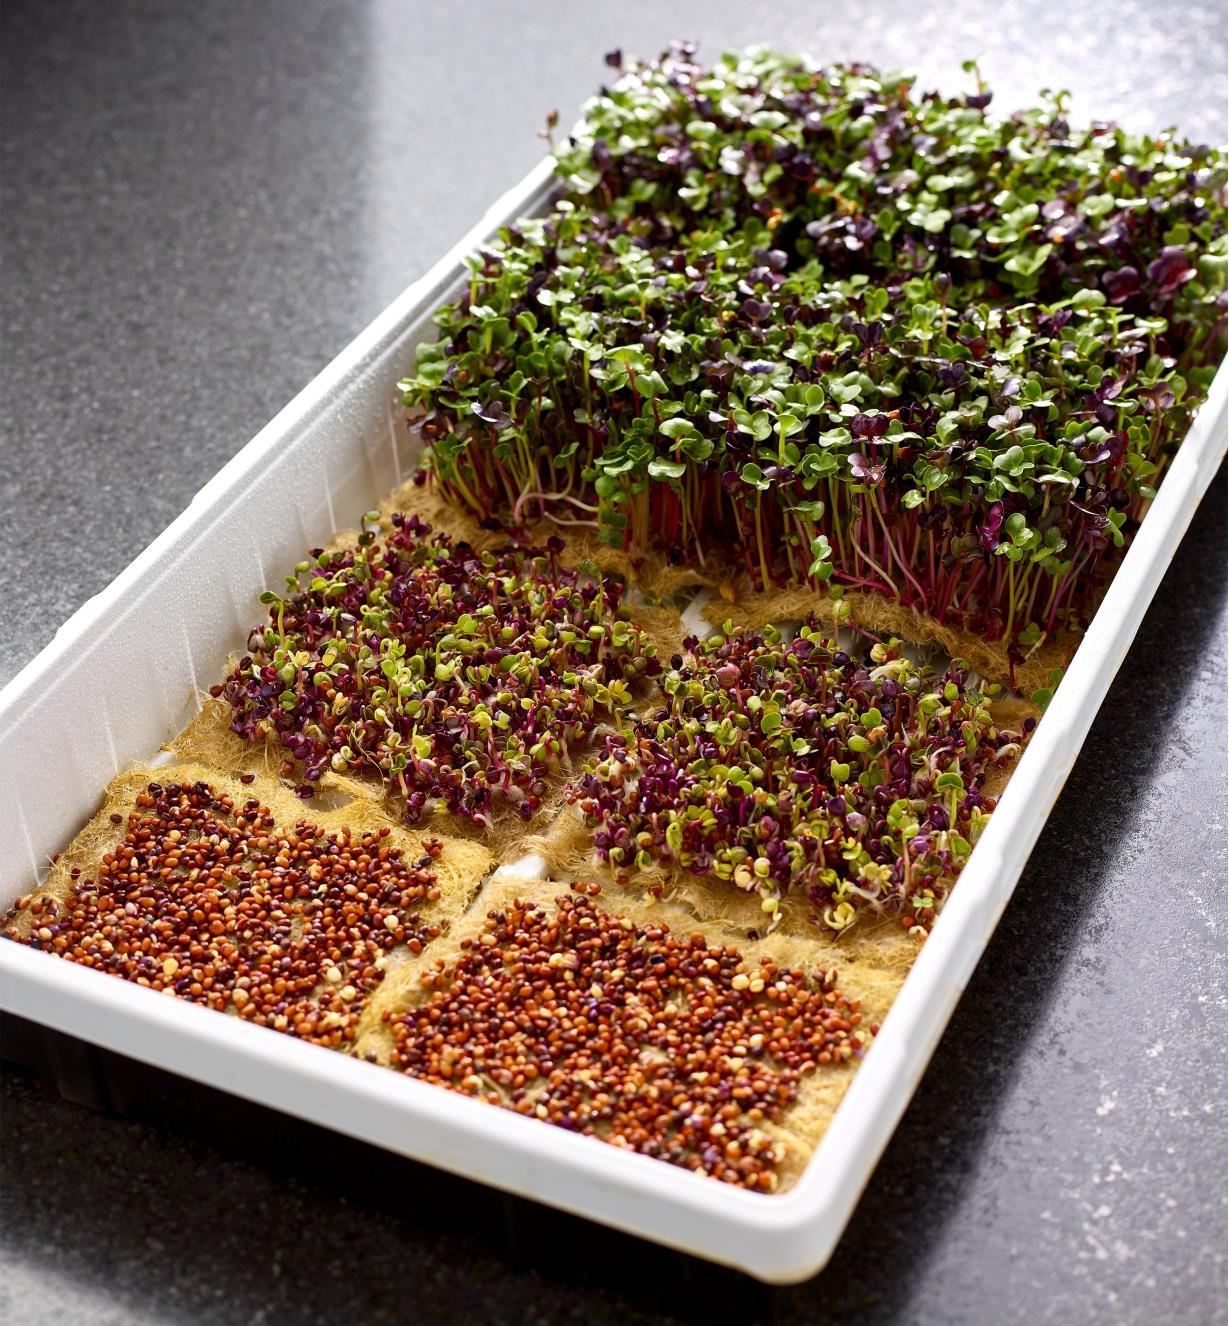 Three hemp-fiber grow mats showing seed, germination and sprout stages of microgreens